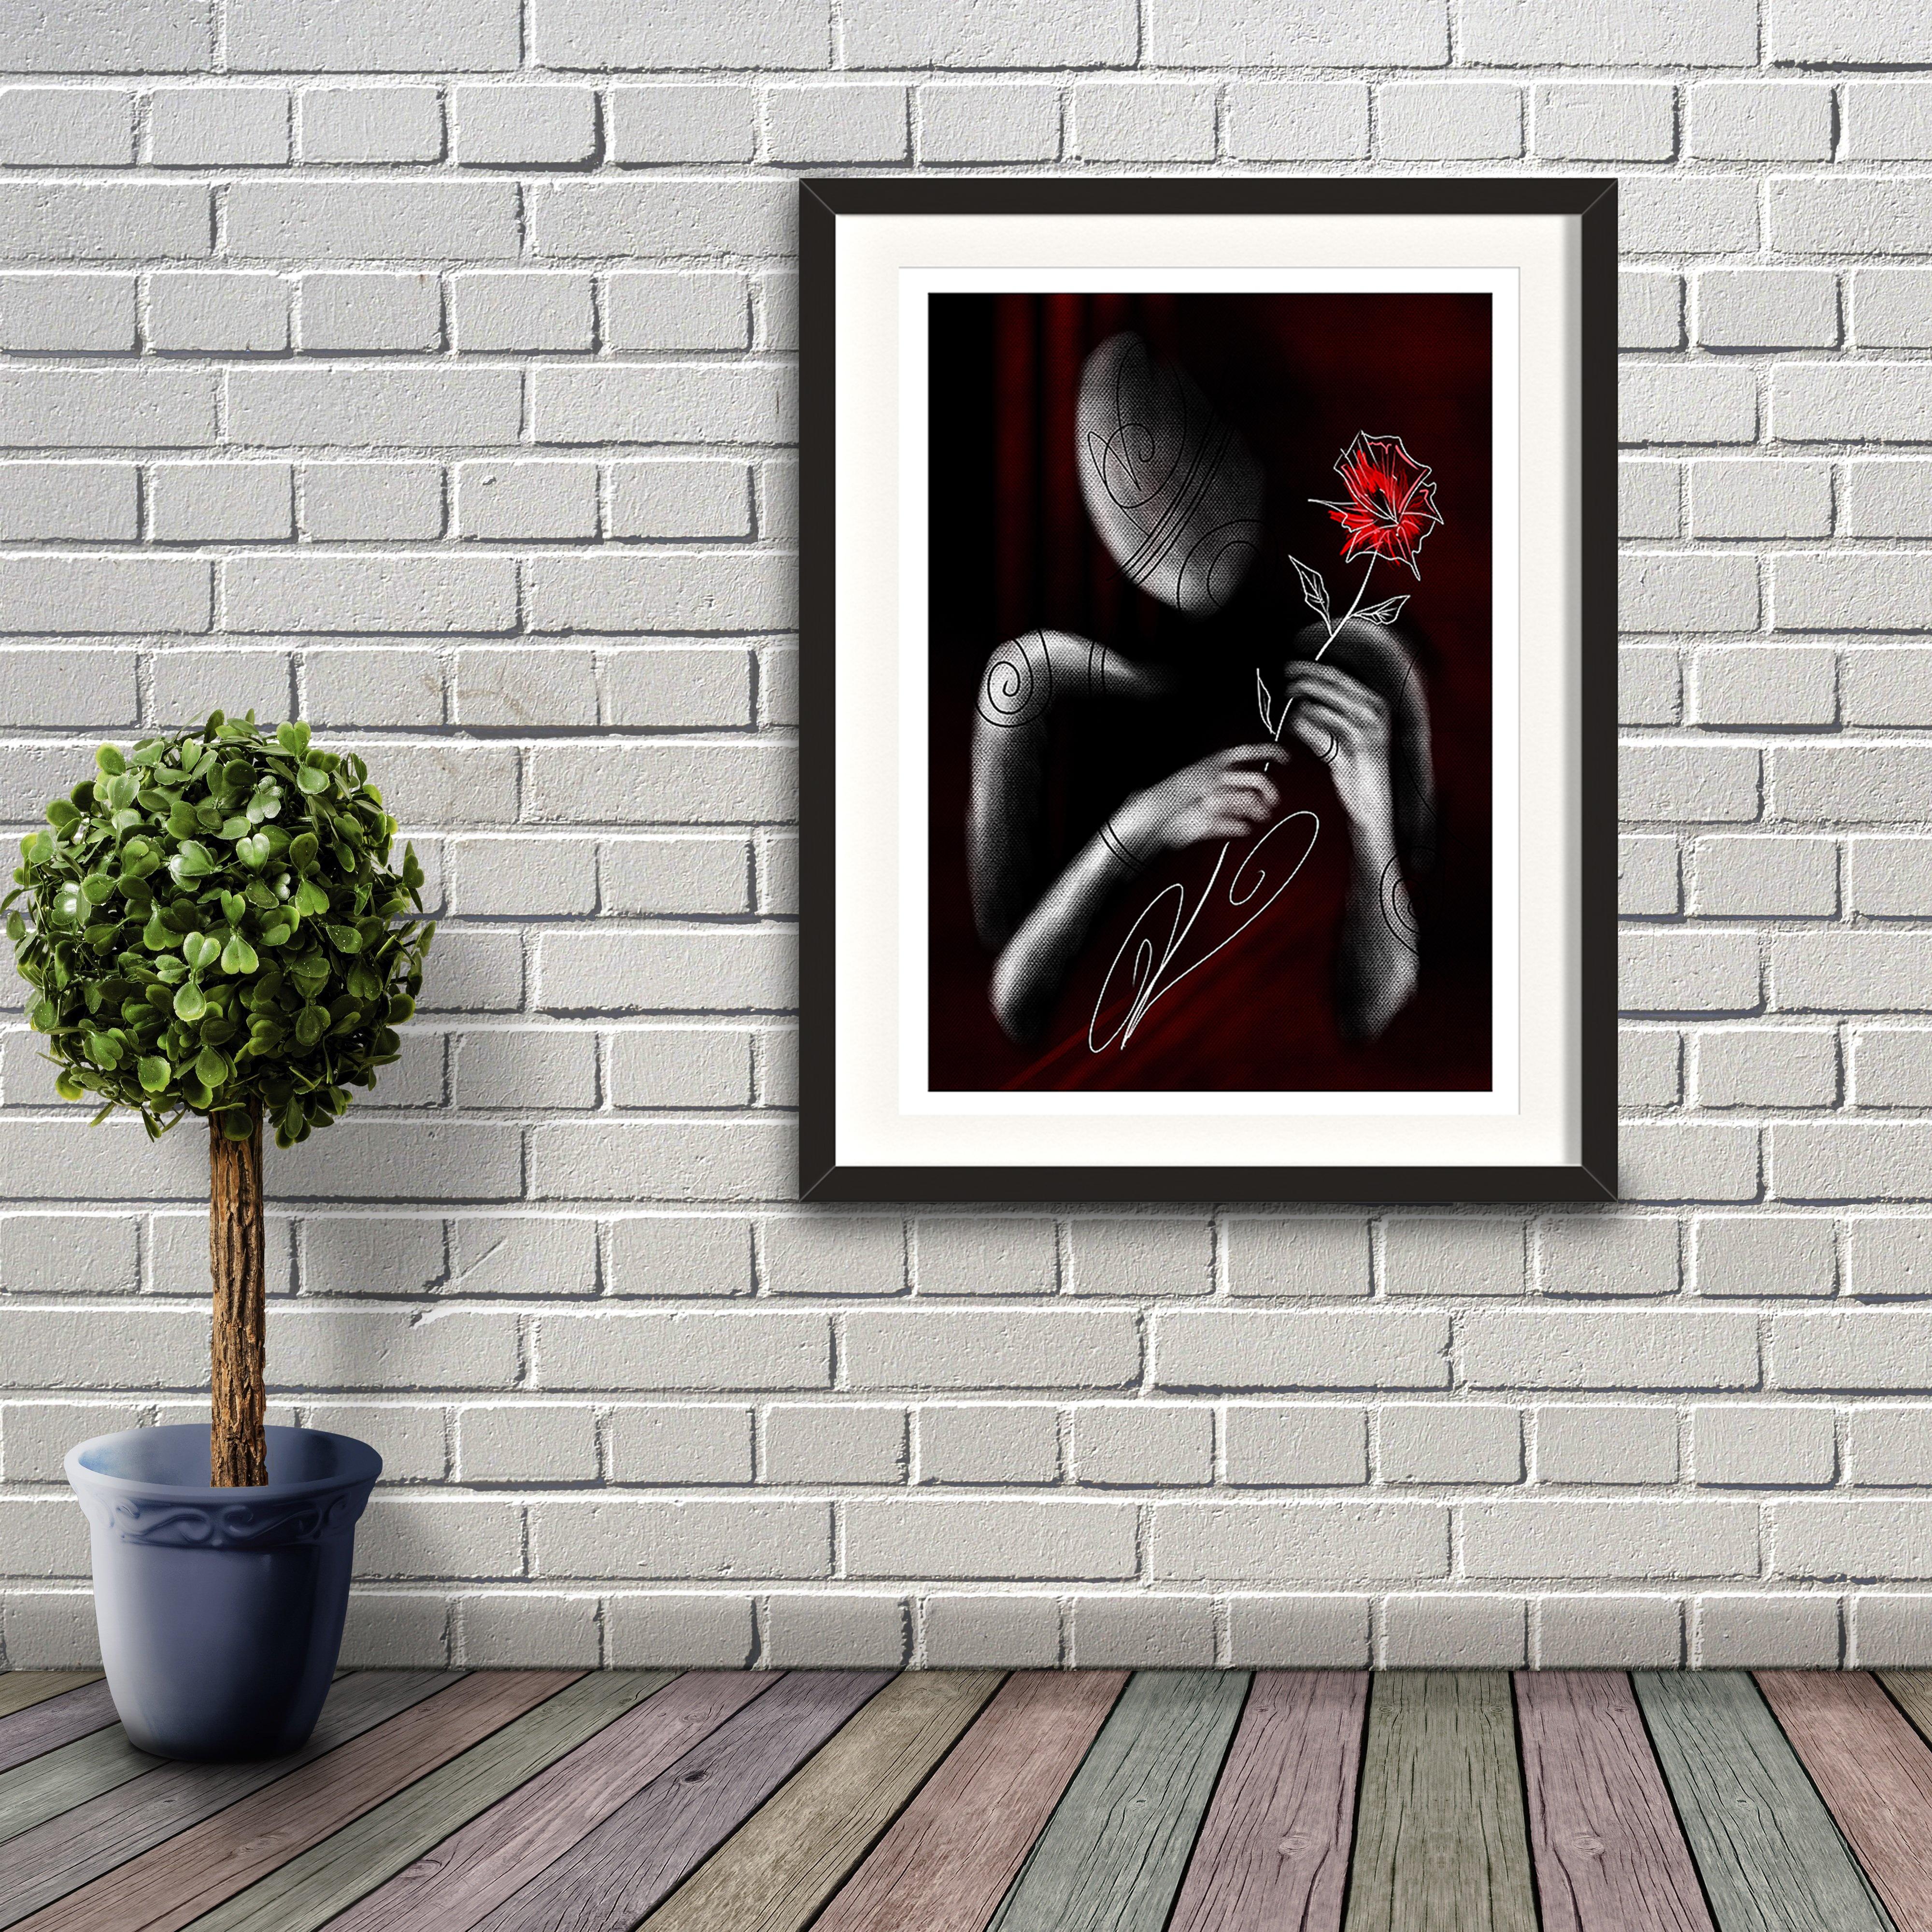 A greyscale digital painting by Lily Bourne shwing the minimalist outline of a figure presenting a red flower to viewer of the image. Artwork shown in a black frame hanging on a brick wall.